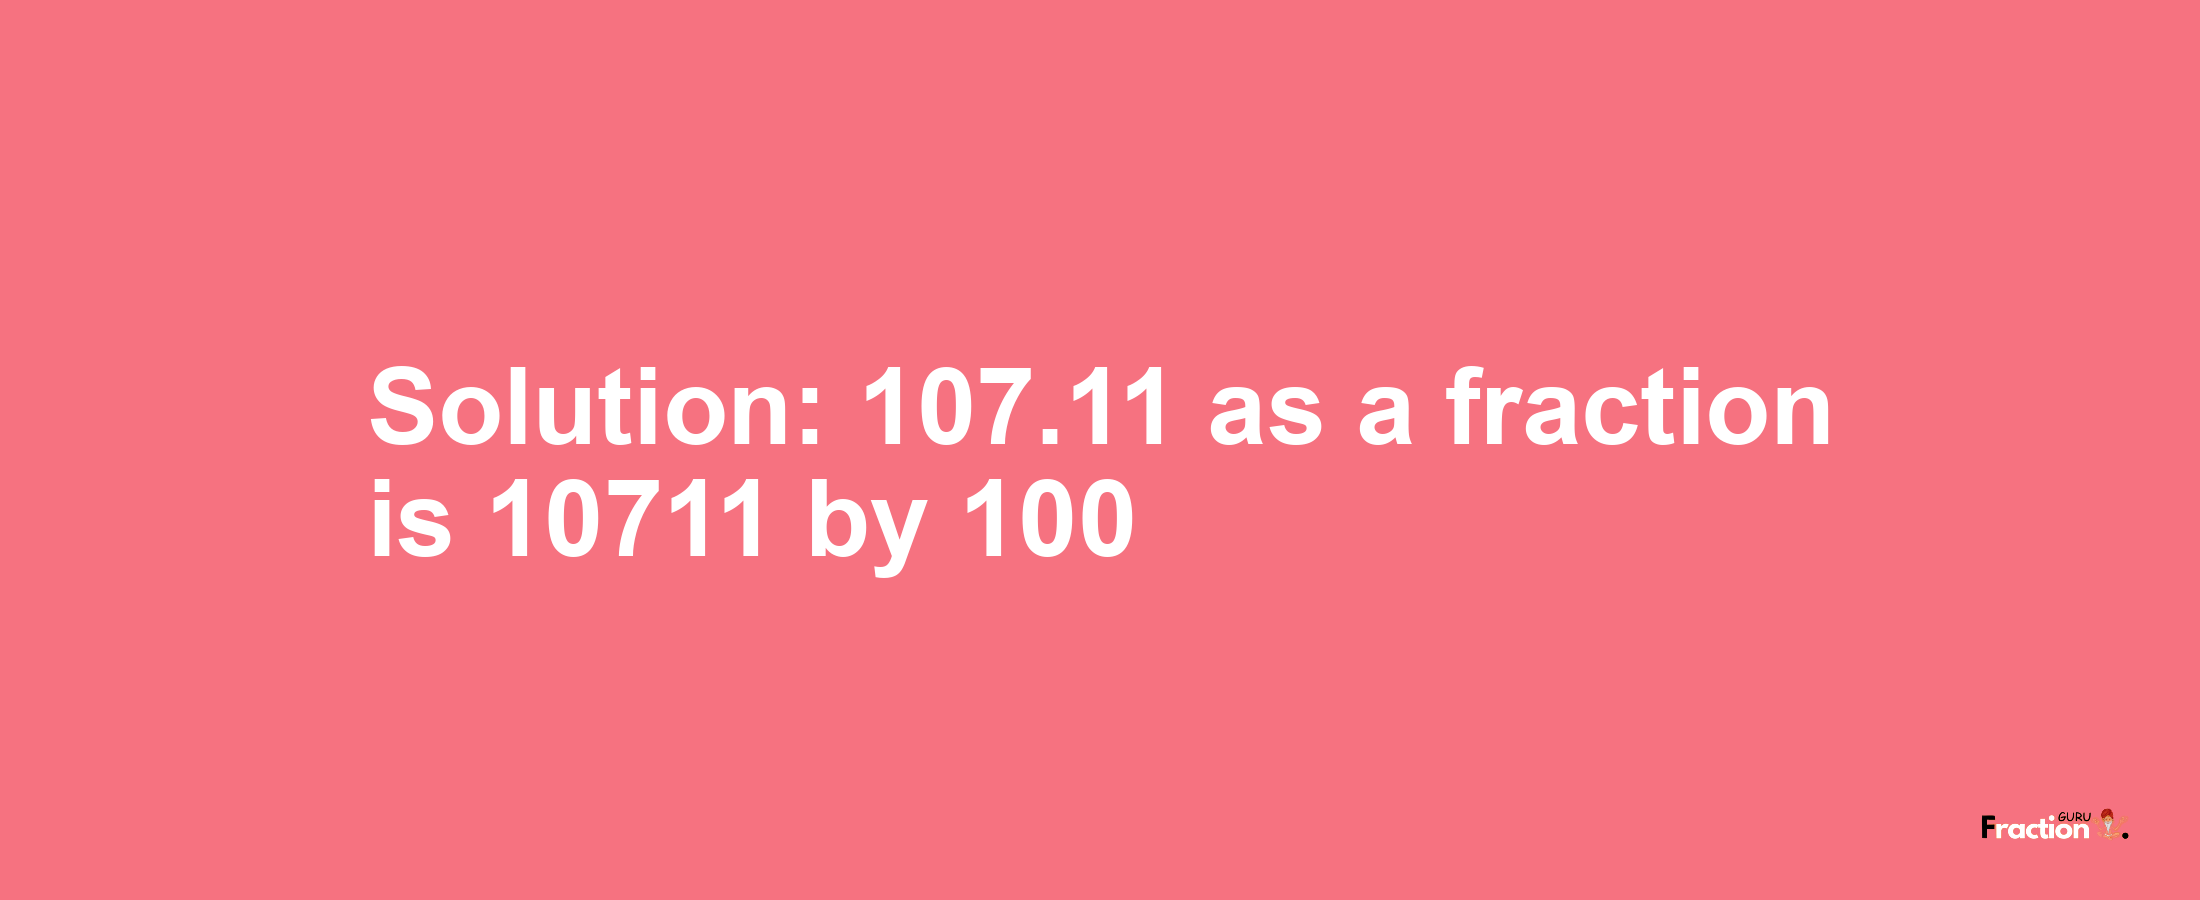 Solution:107.11 as a fraction is 10711/100